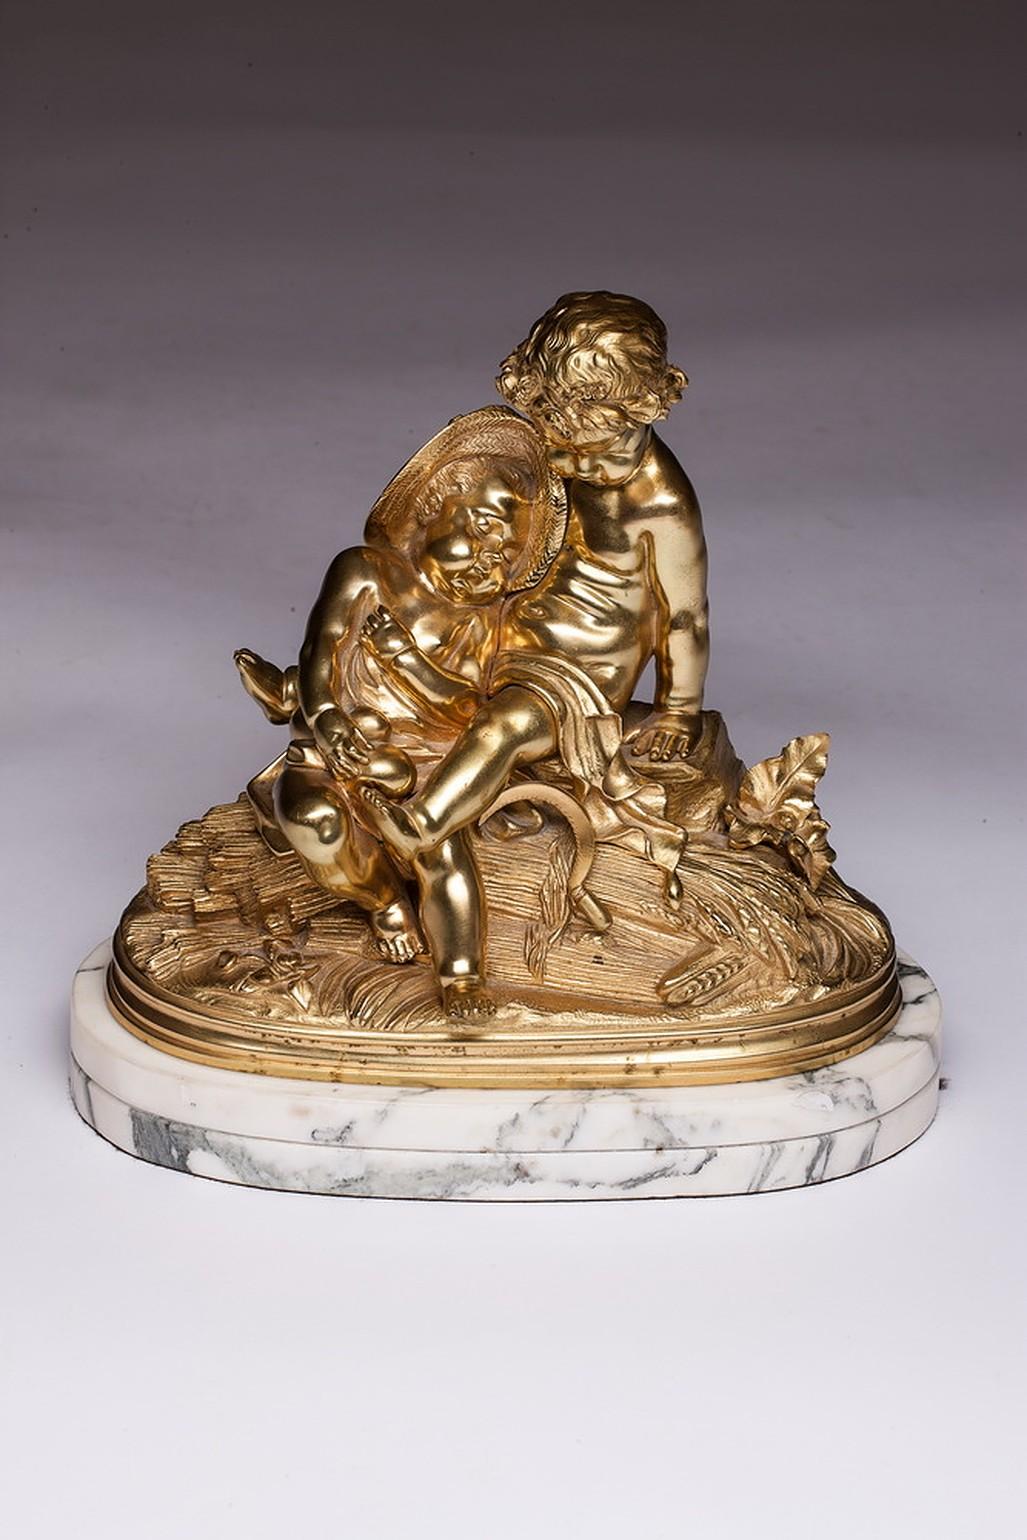 Baroque French Bronze Sculpture with Two Cherub Putti on the Marble Base, 19th Century For Sale